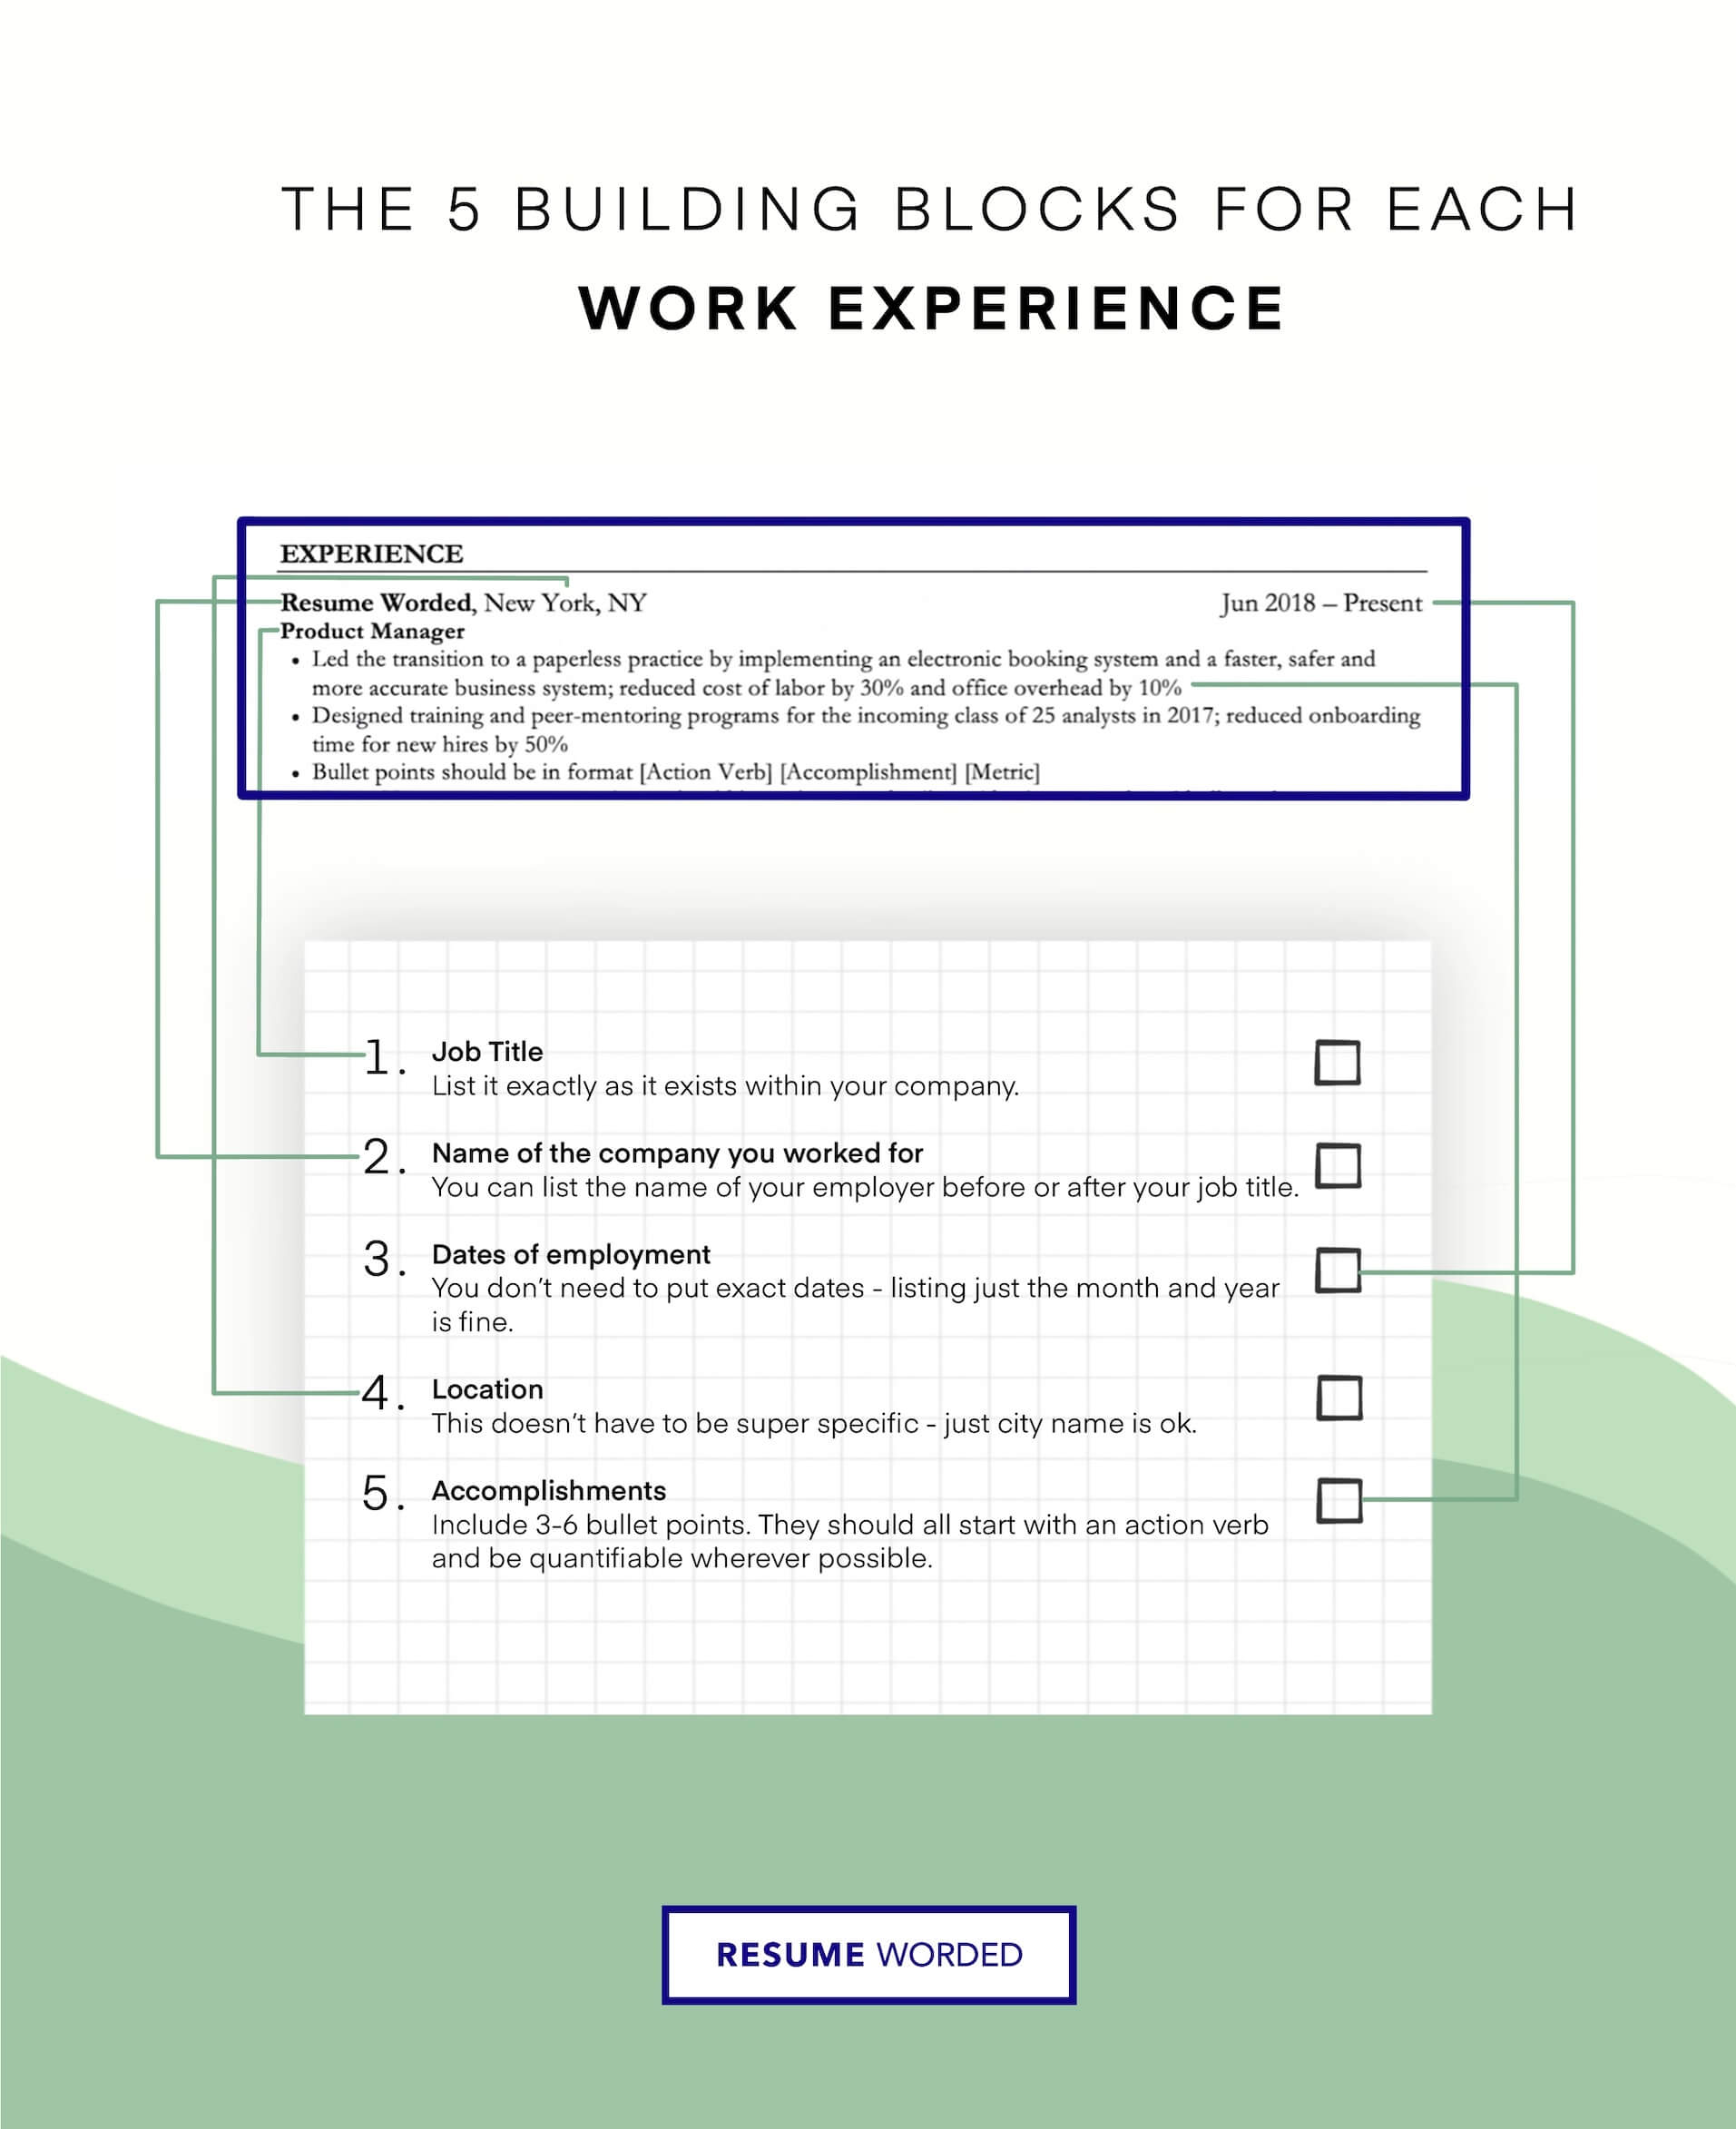 Showcase your experience with different methodologies - UX Researcher CV